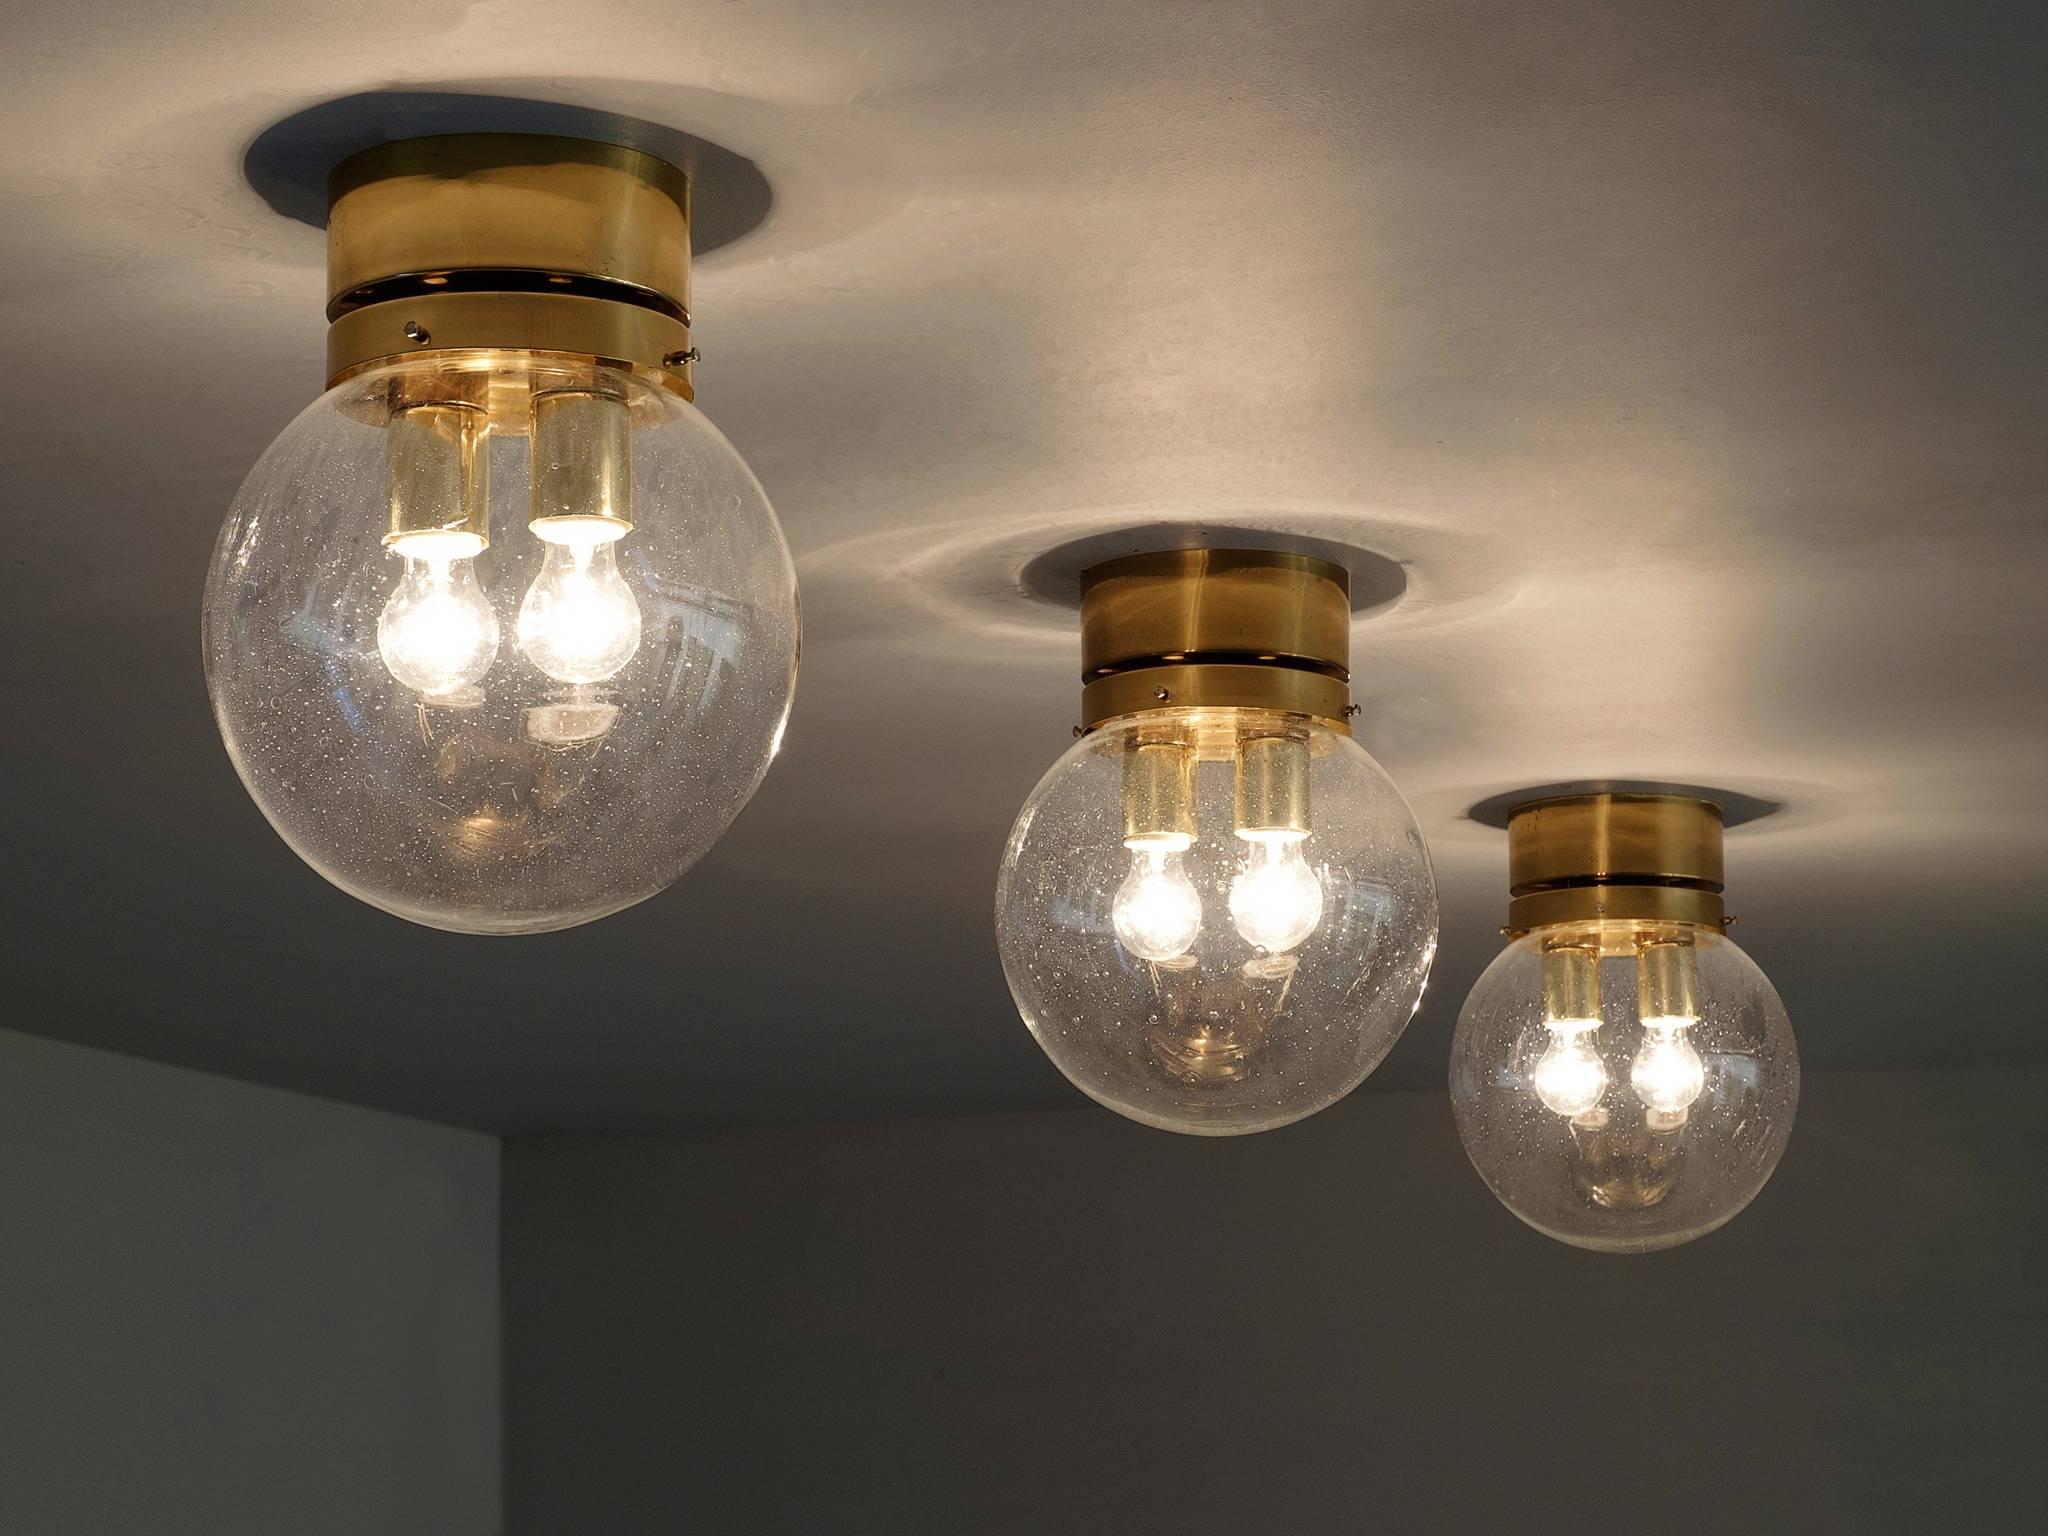 Set of 5 flush mount lights, in glass and brass, Europe, 1970s.

Set of modern and minimalistic ceiling lights in brass and glass. Each light consist of a round brass fixture and a raindrop glass sphere. Inside the sphere are two light-points. The